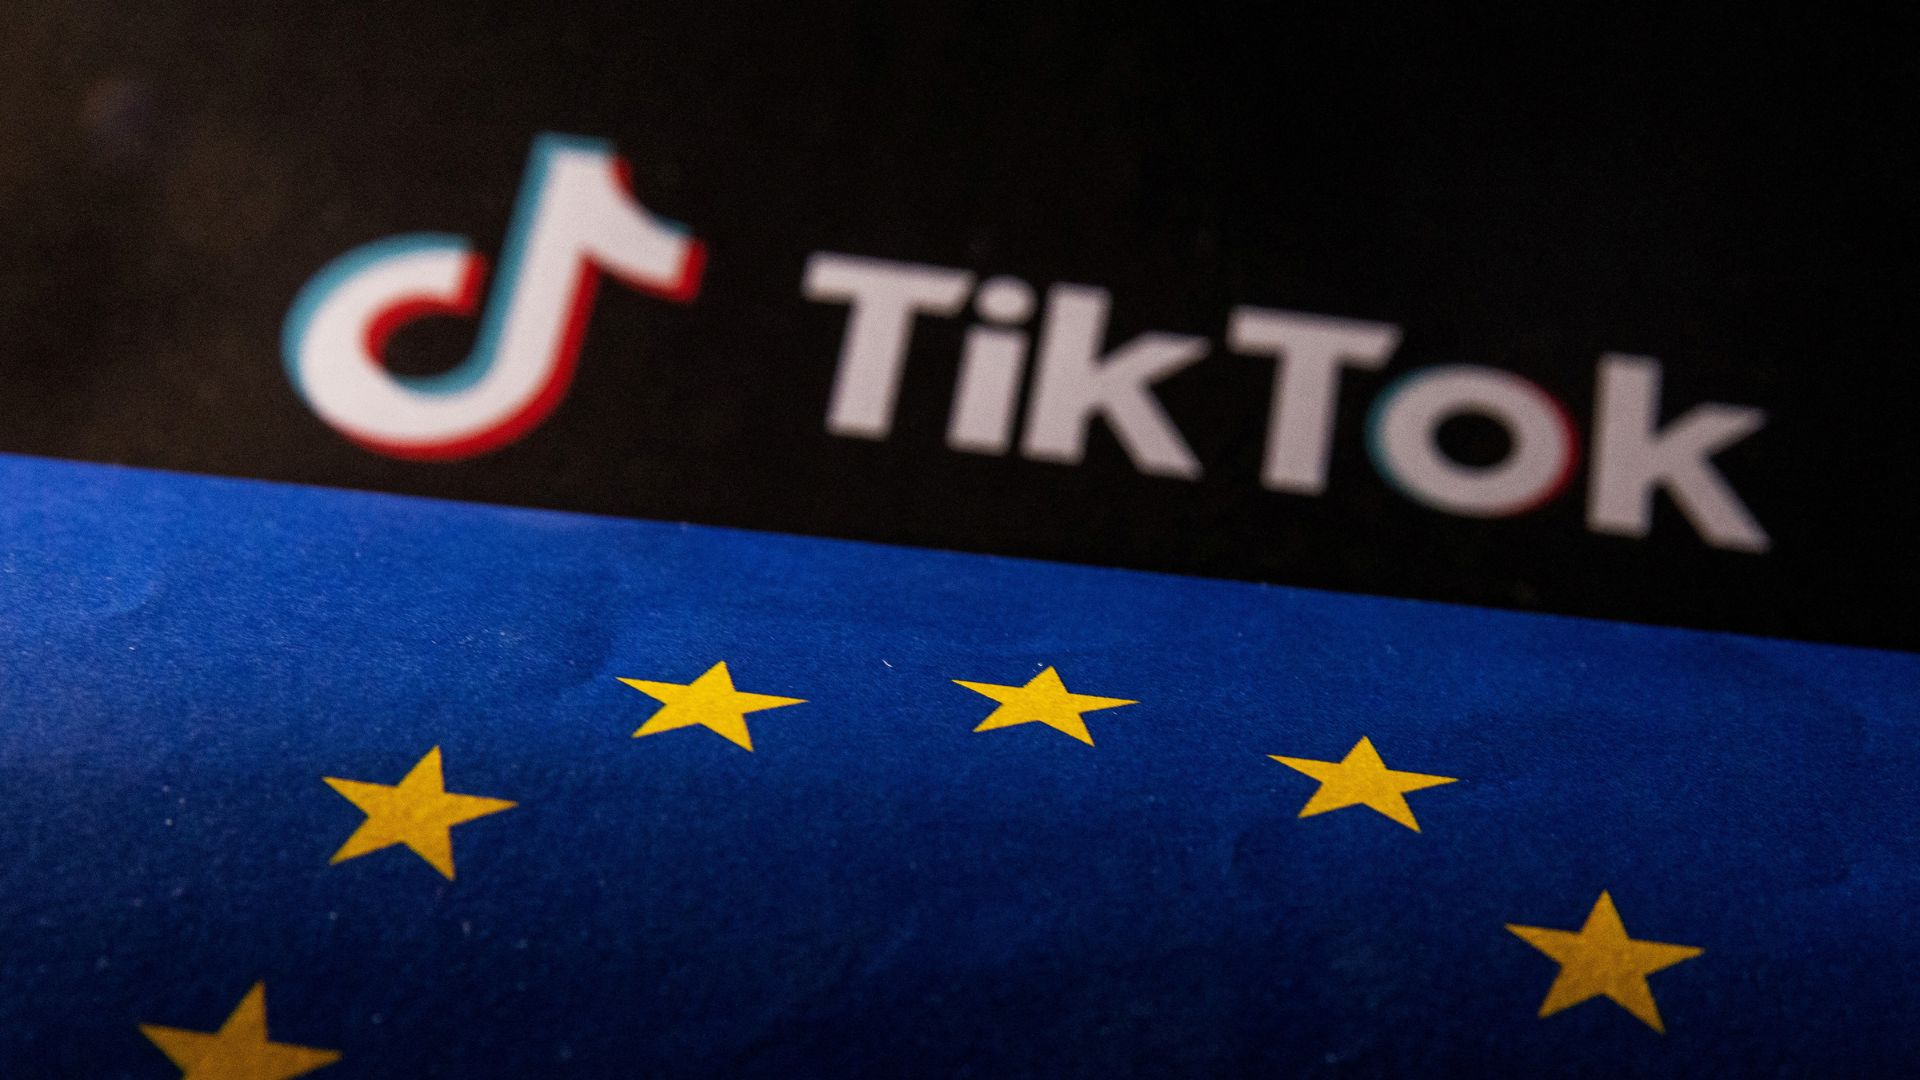 Tiktok finds itself in the EU's crosshairs in the bloc's probe into child protection and advertising transparency. /Dado Ruvic/Illustration/Reuters